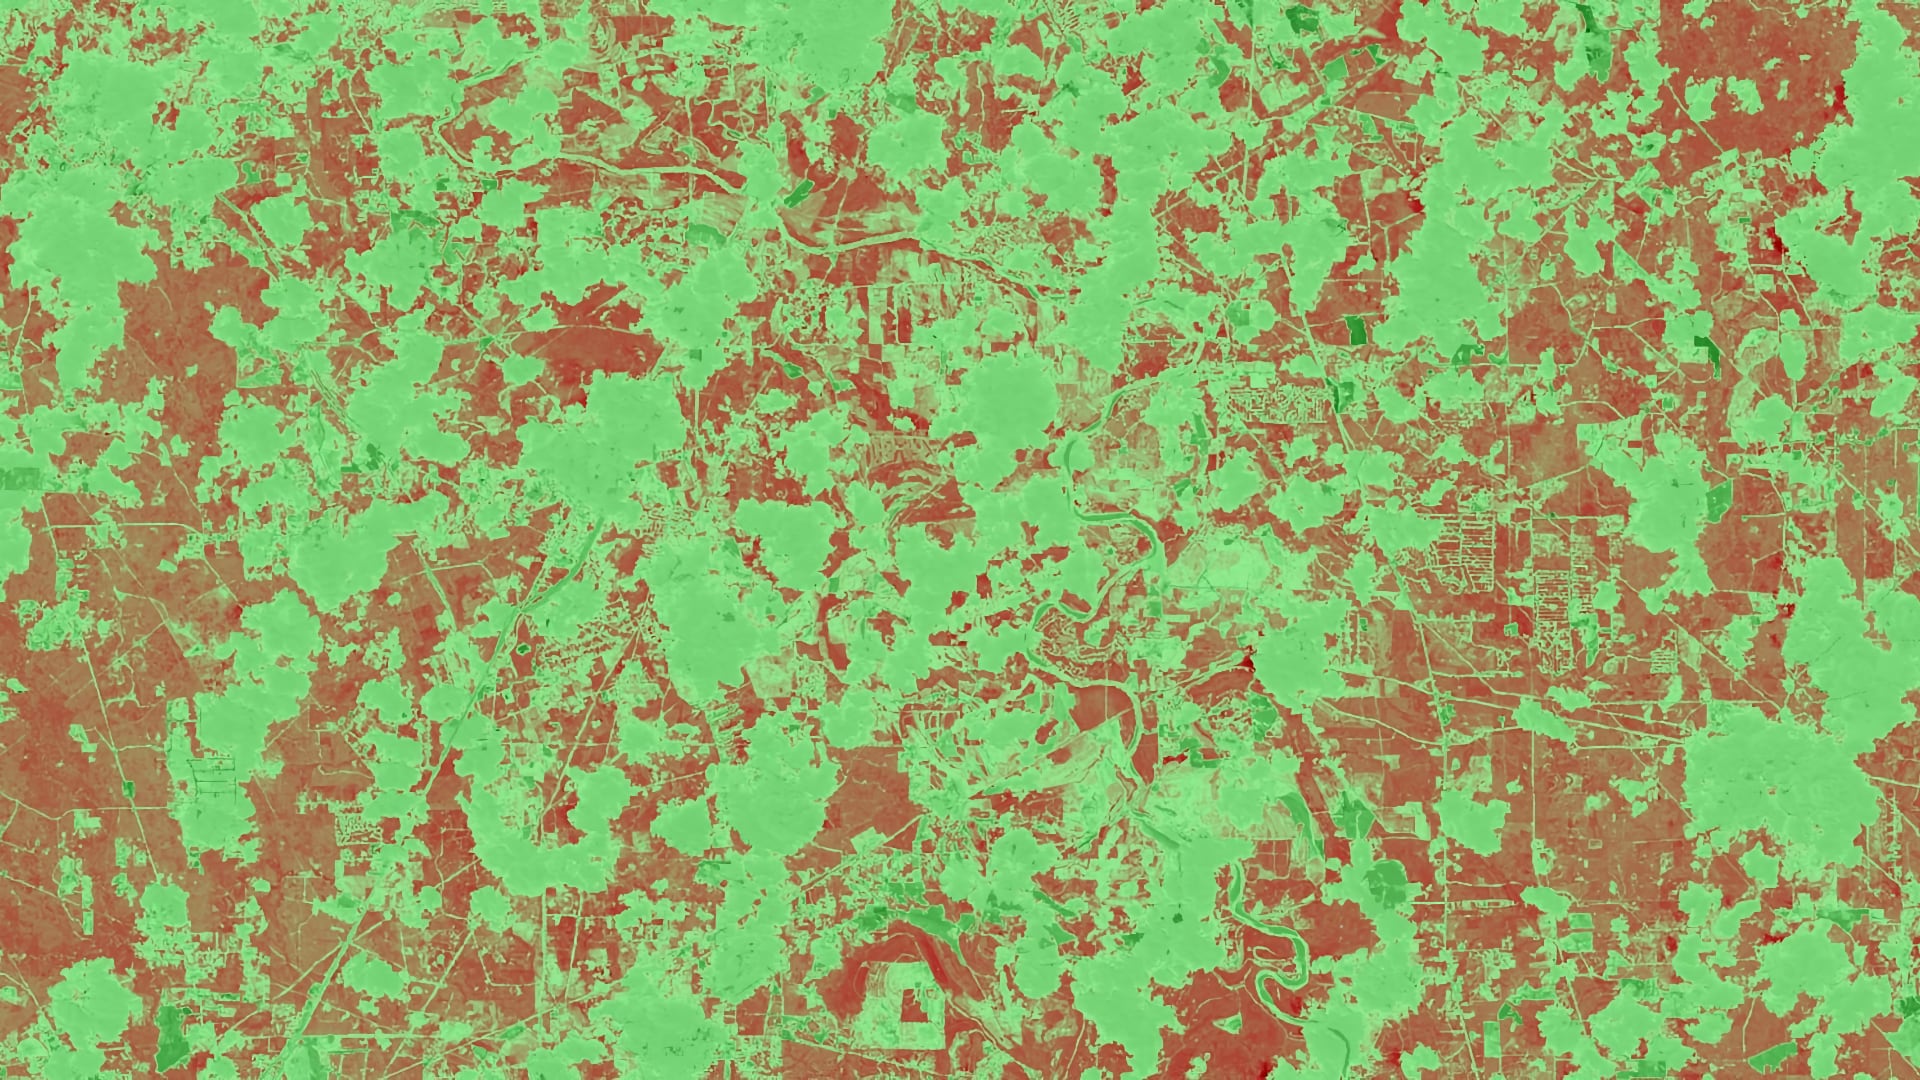 Normalized Difference Vegetation Index (NDVI) maximum values derived from composited June 2018 Landsat 8 OLI images of Houston, Texas, are displayed. The green areas indicate the presence of healthy vegetation, whereas the red values indicate the lack of healthy vegetation. NDVI maximum data allow partners to estimate urban tree canopy mortality and recovery for better resource allocation.